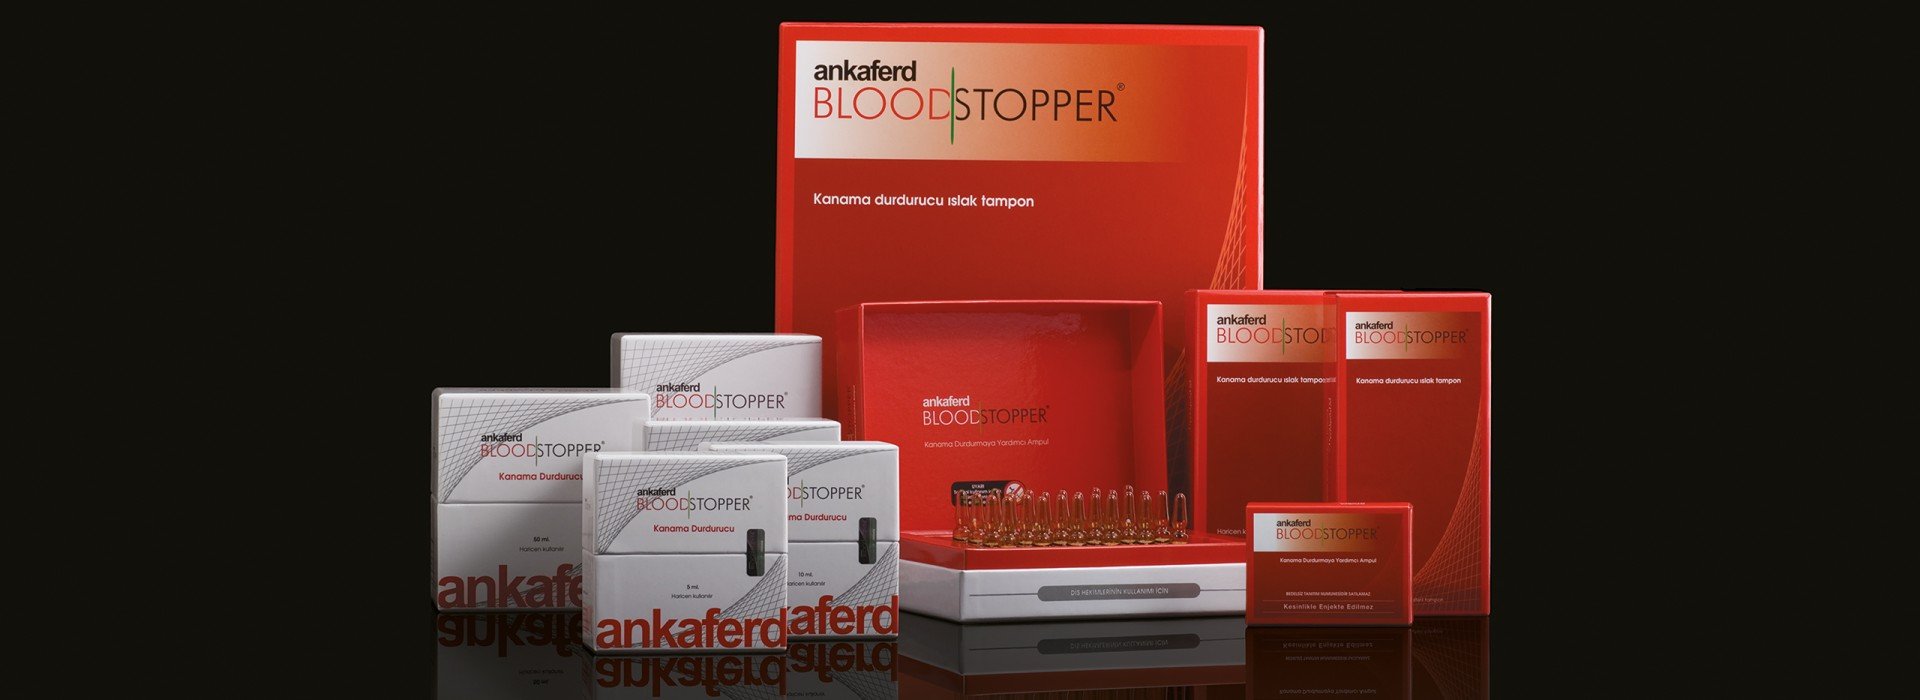 The Future of Haemostatic Agents: Advancements in Ankaferd Blood Stopper Haemostatic Agent Technology.